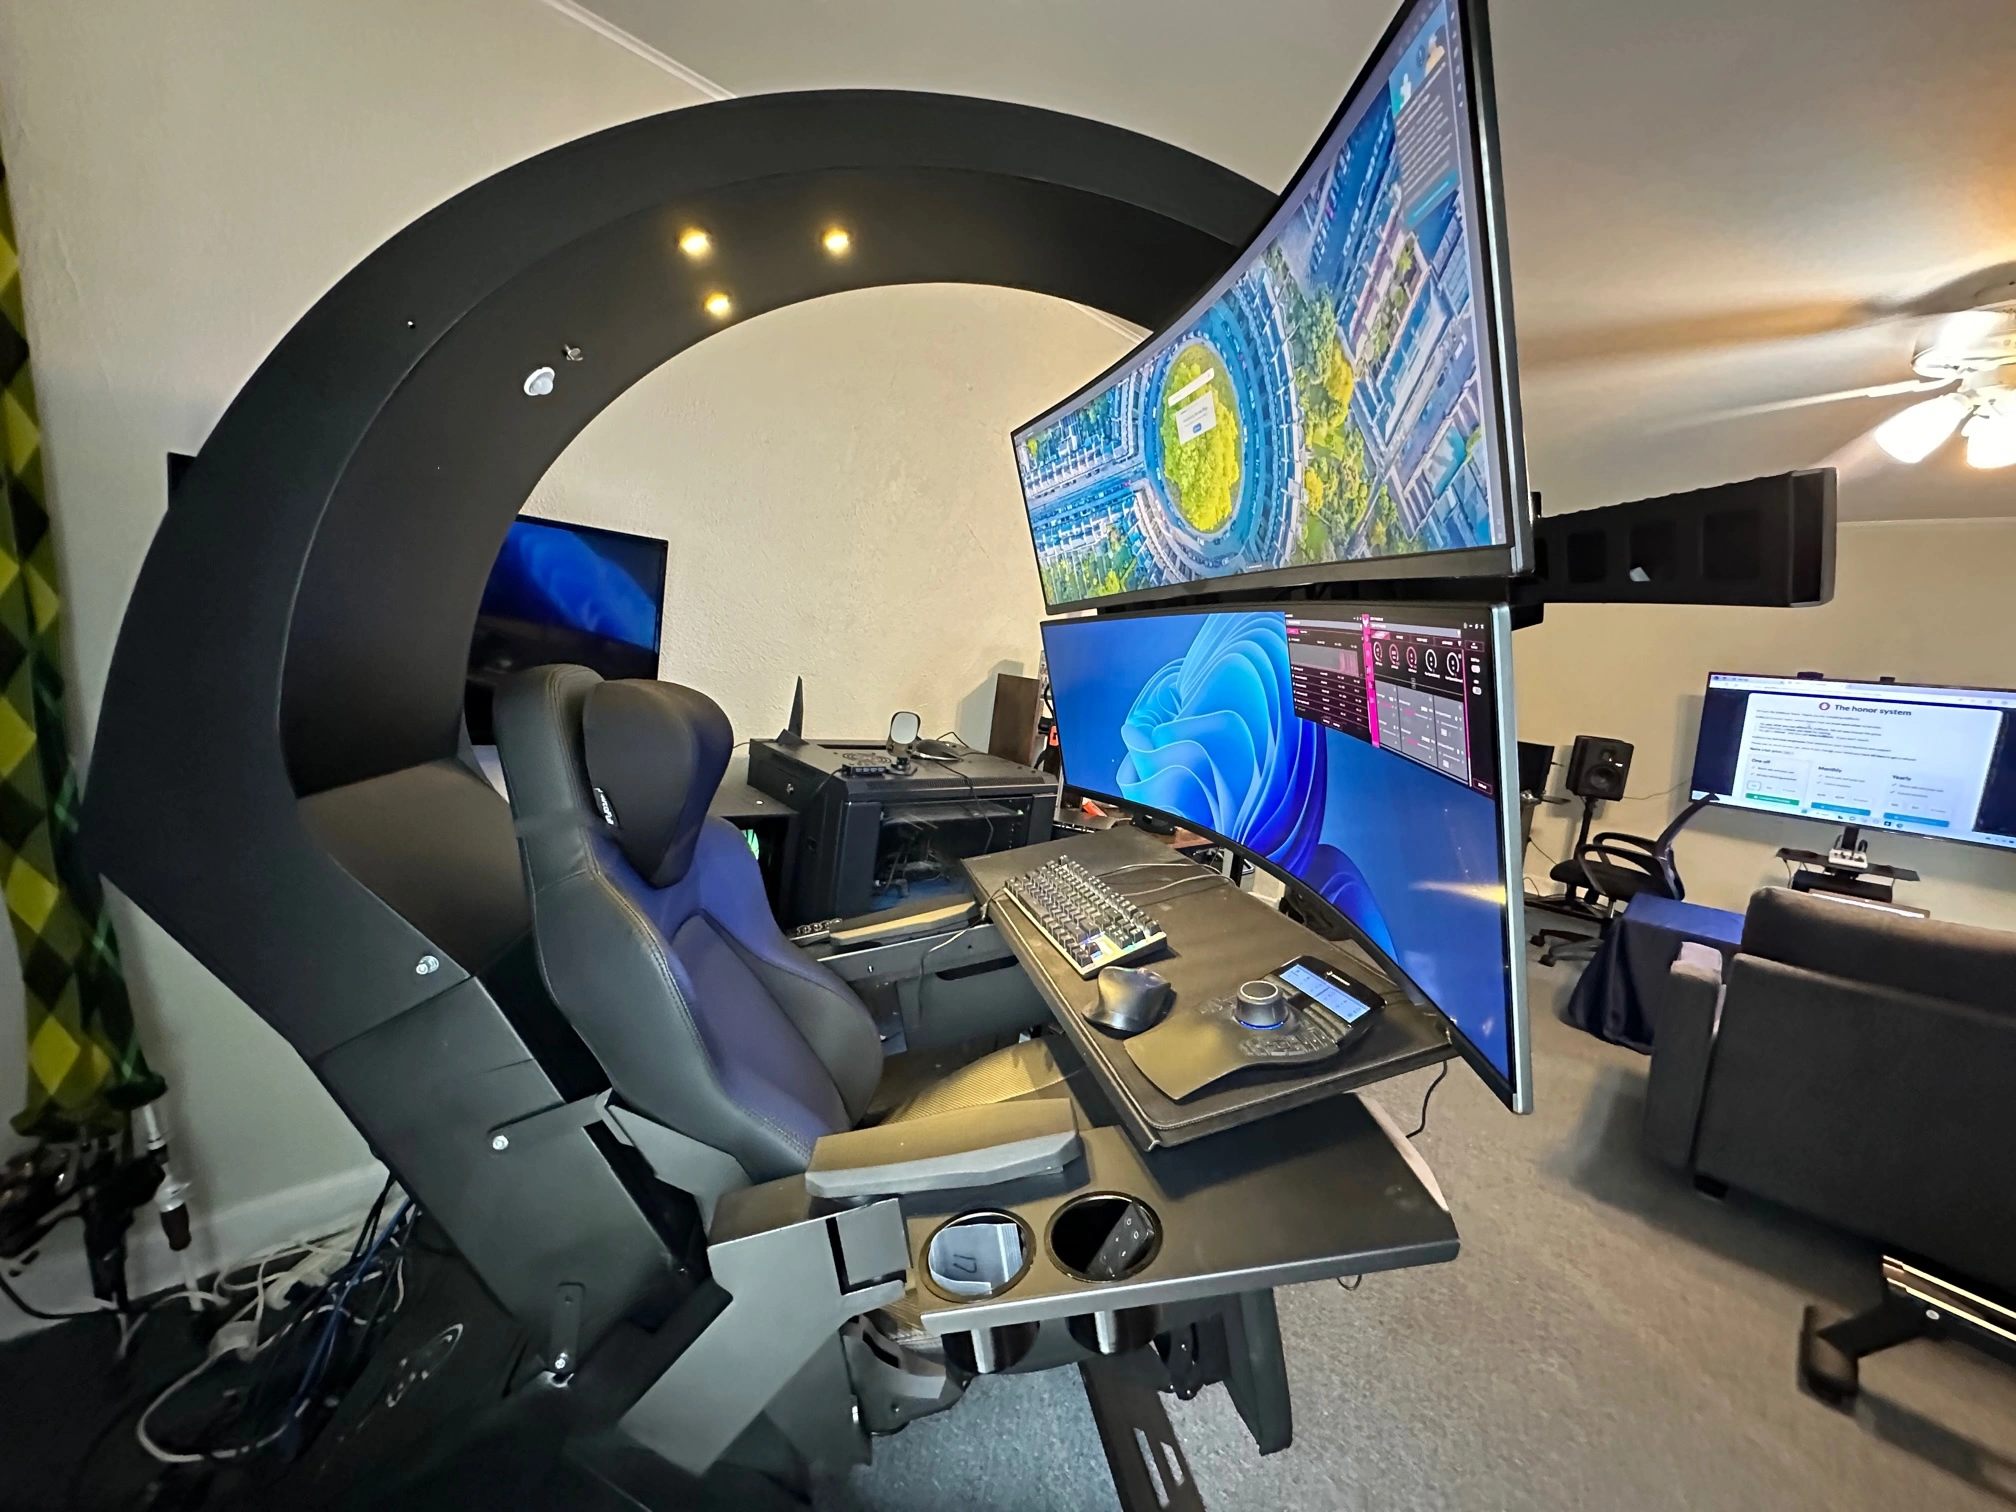 Black Friday Model 320 Computer cockpit chari workstation support upto 5 screens zero gravity one click Racing / Boss seat with massage Most affordable and easy move upstairs installation